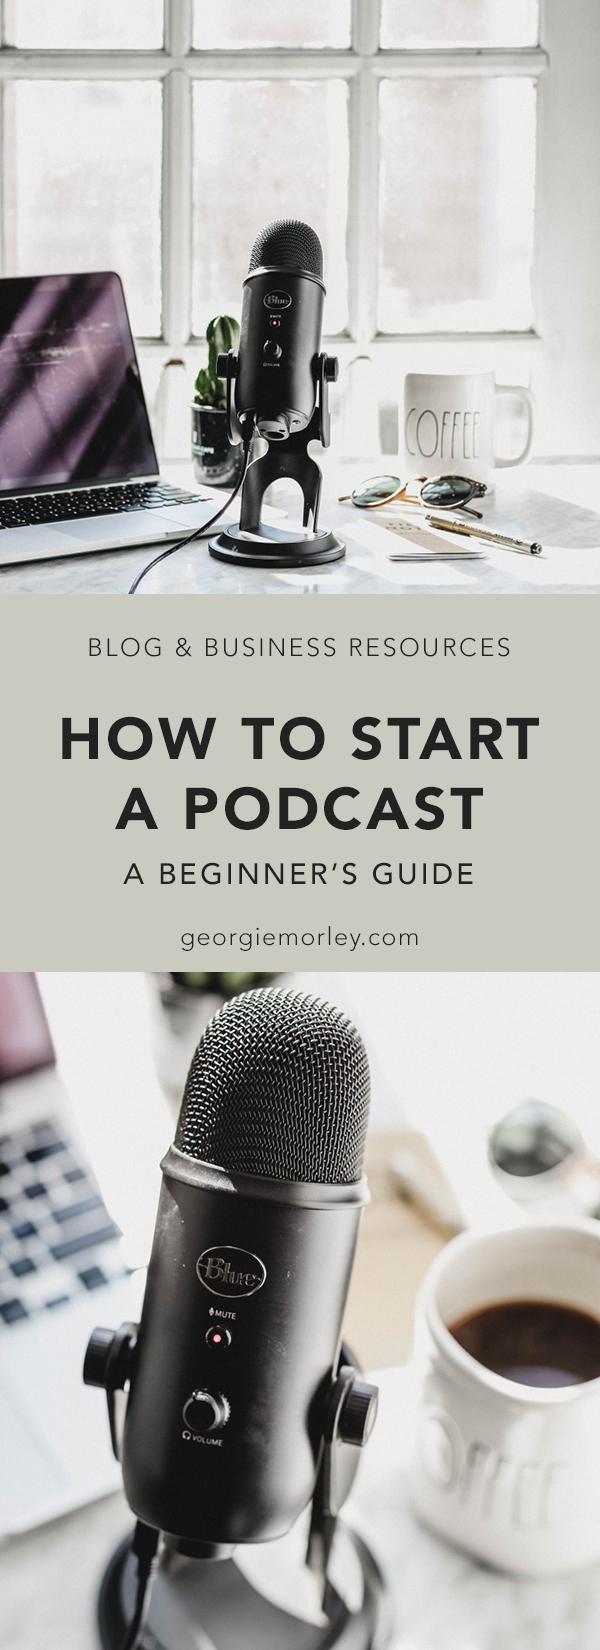 How to start a podcast - a guide for beginners